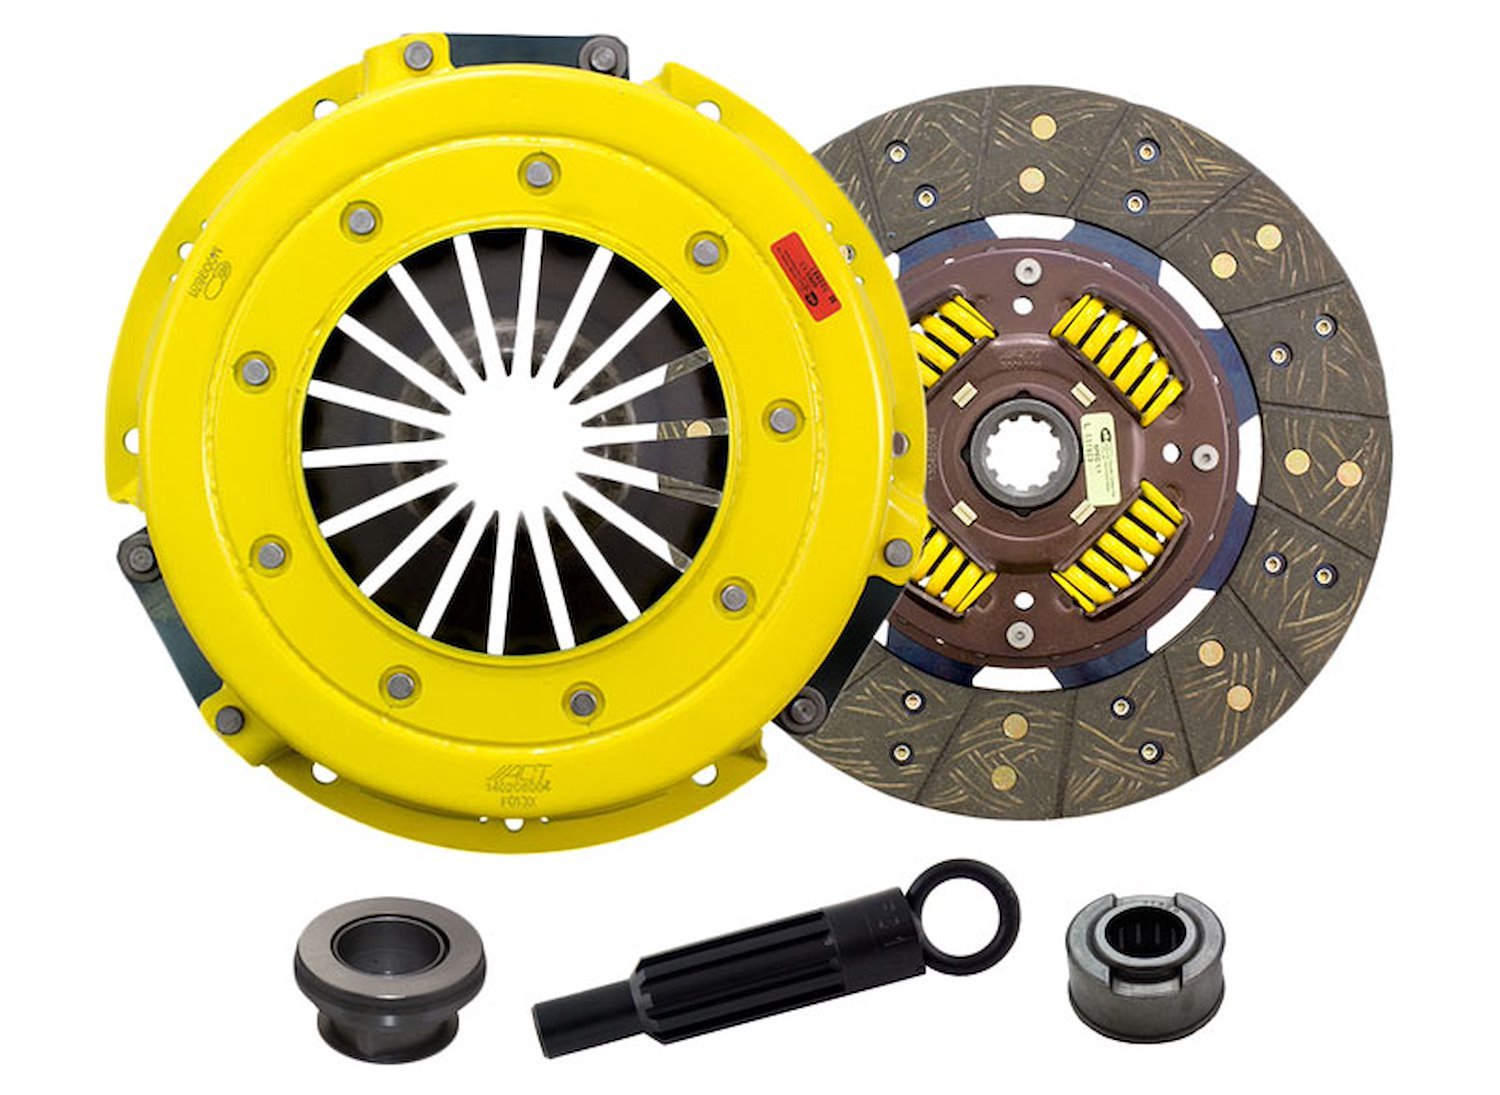 XT/Performance Street Sprung Transmission Clutch Kit Fits Select Ford/Lincoln/Mercury/Mazda